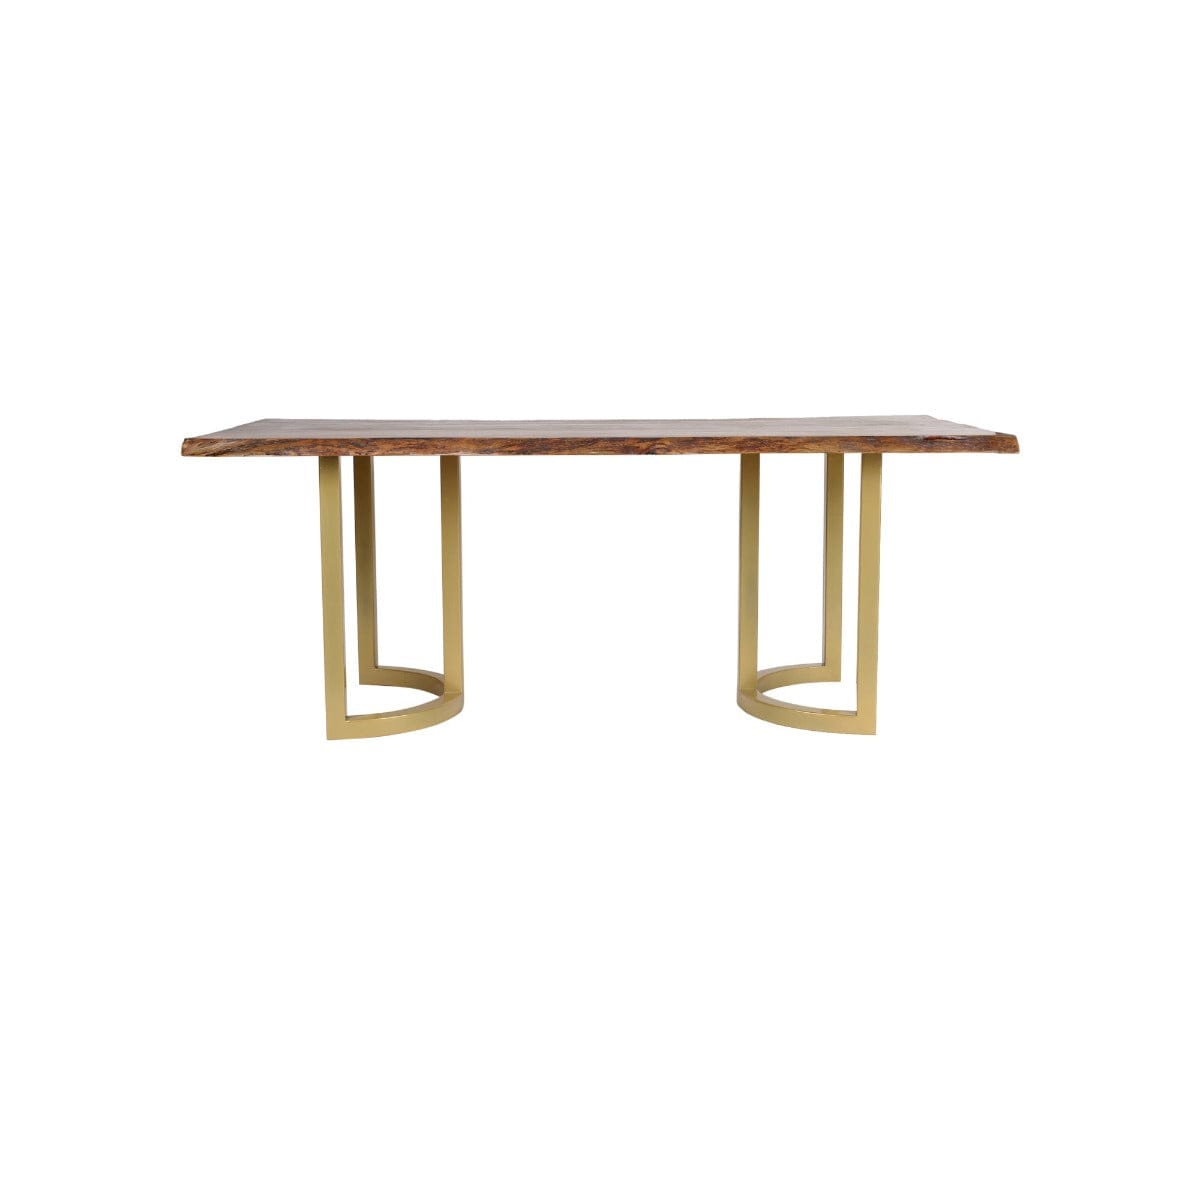 Eros 6 Seater Wooden Dining Table Set In Gold Finish